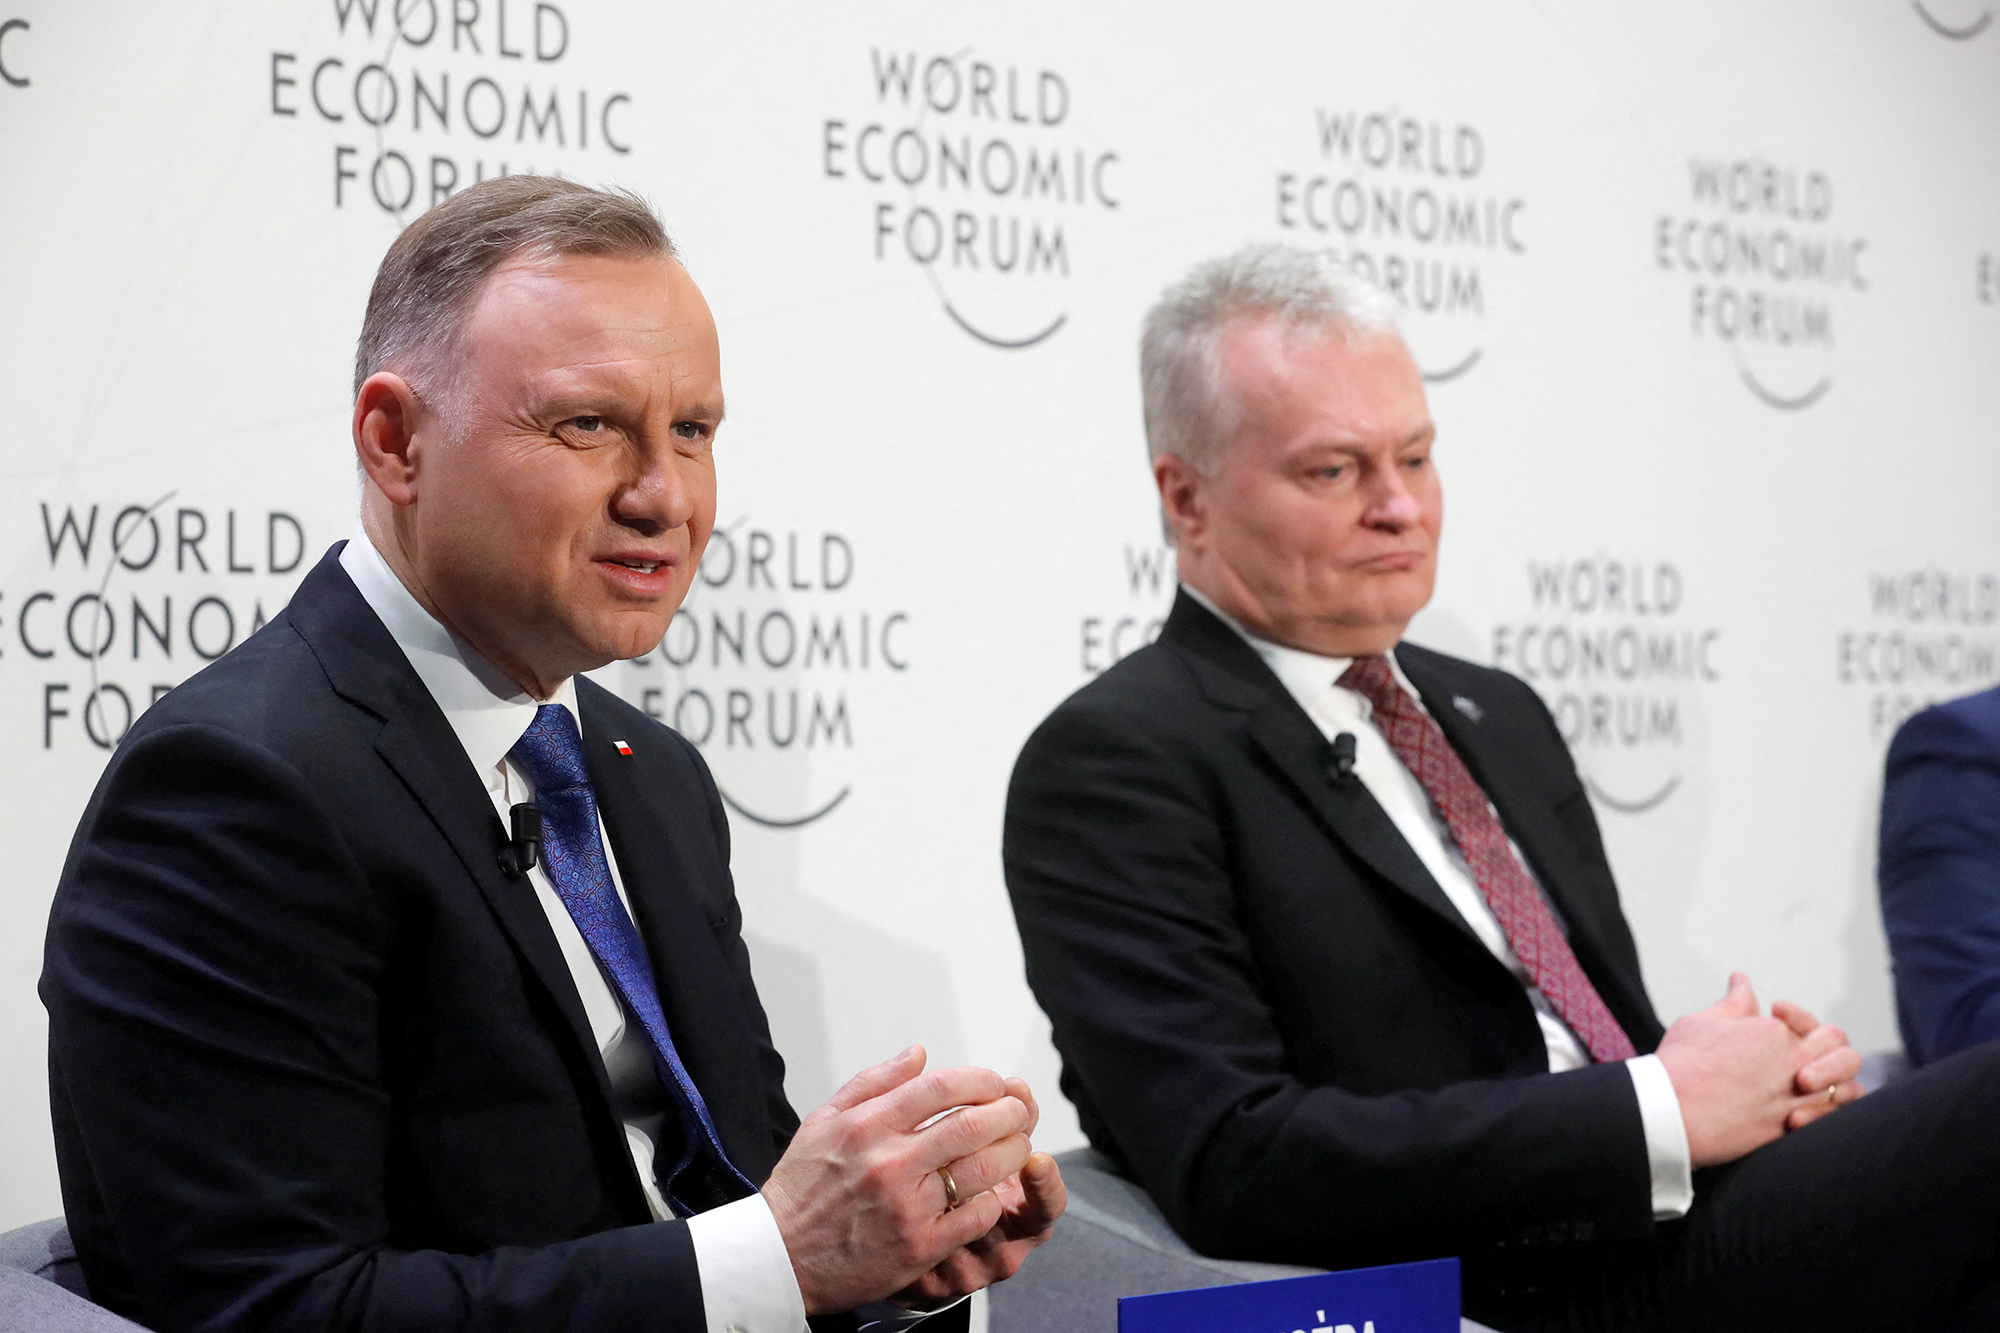 Poland's President Andrzej Duda. left, and Lithuania's President Gitanas Nauseda take part in World Economic Forum (WEF) session "In Defence of Europe", in Davos, Switzerland, on January 17.